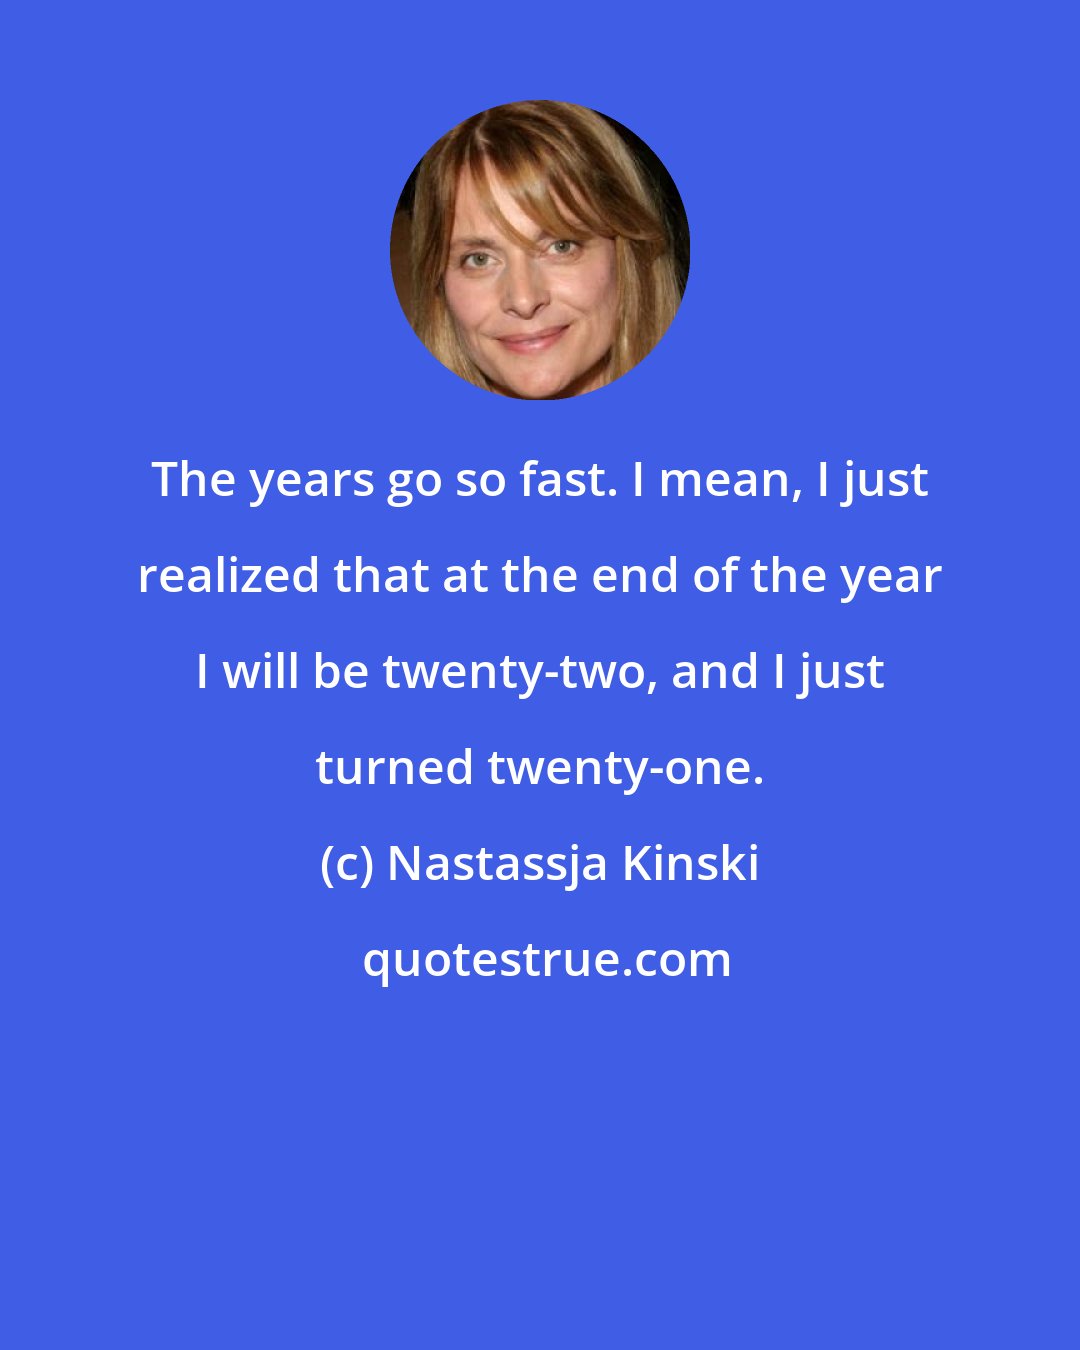 Nastassja Kinski: The years go so fast. I mean, I just realized that at the end of the year I will be twenty-two, and I just turned twenty-one.